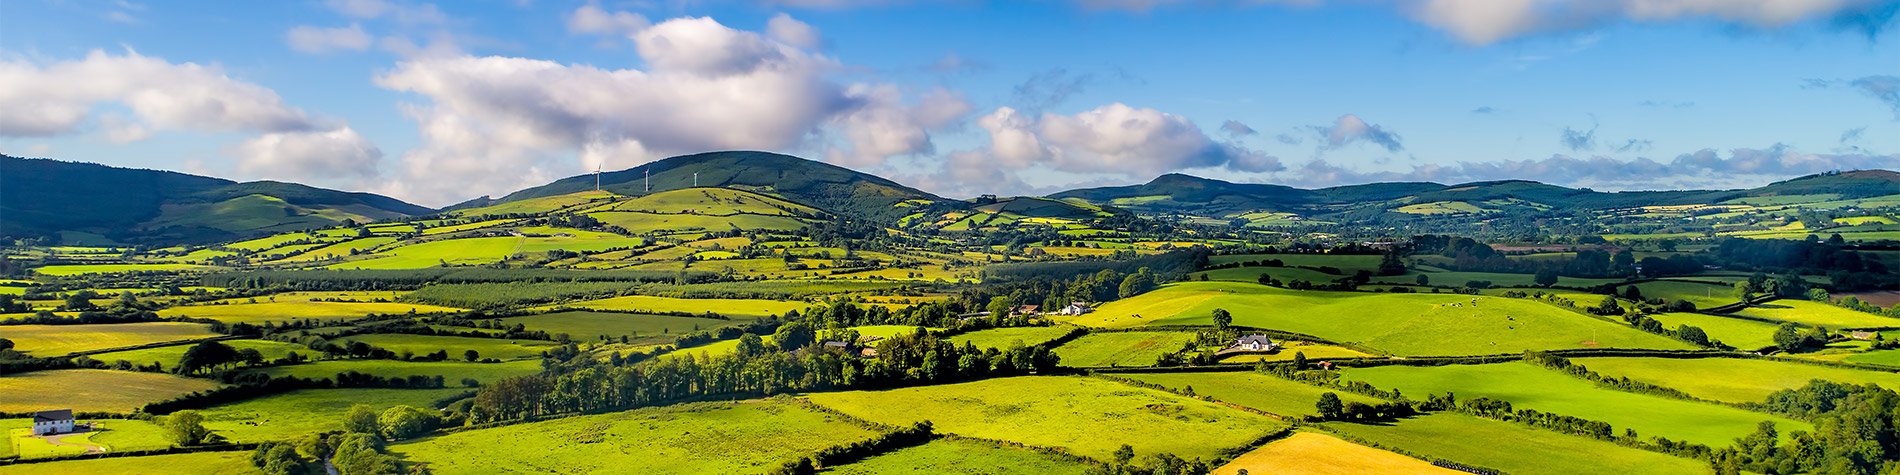 Here Are Some of the Best Reasons to Visit Ireland in 2018